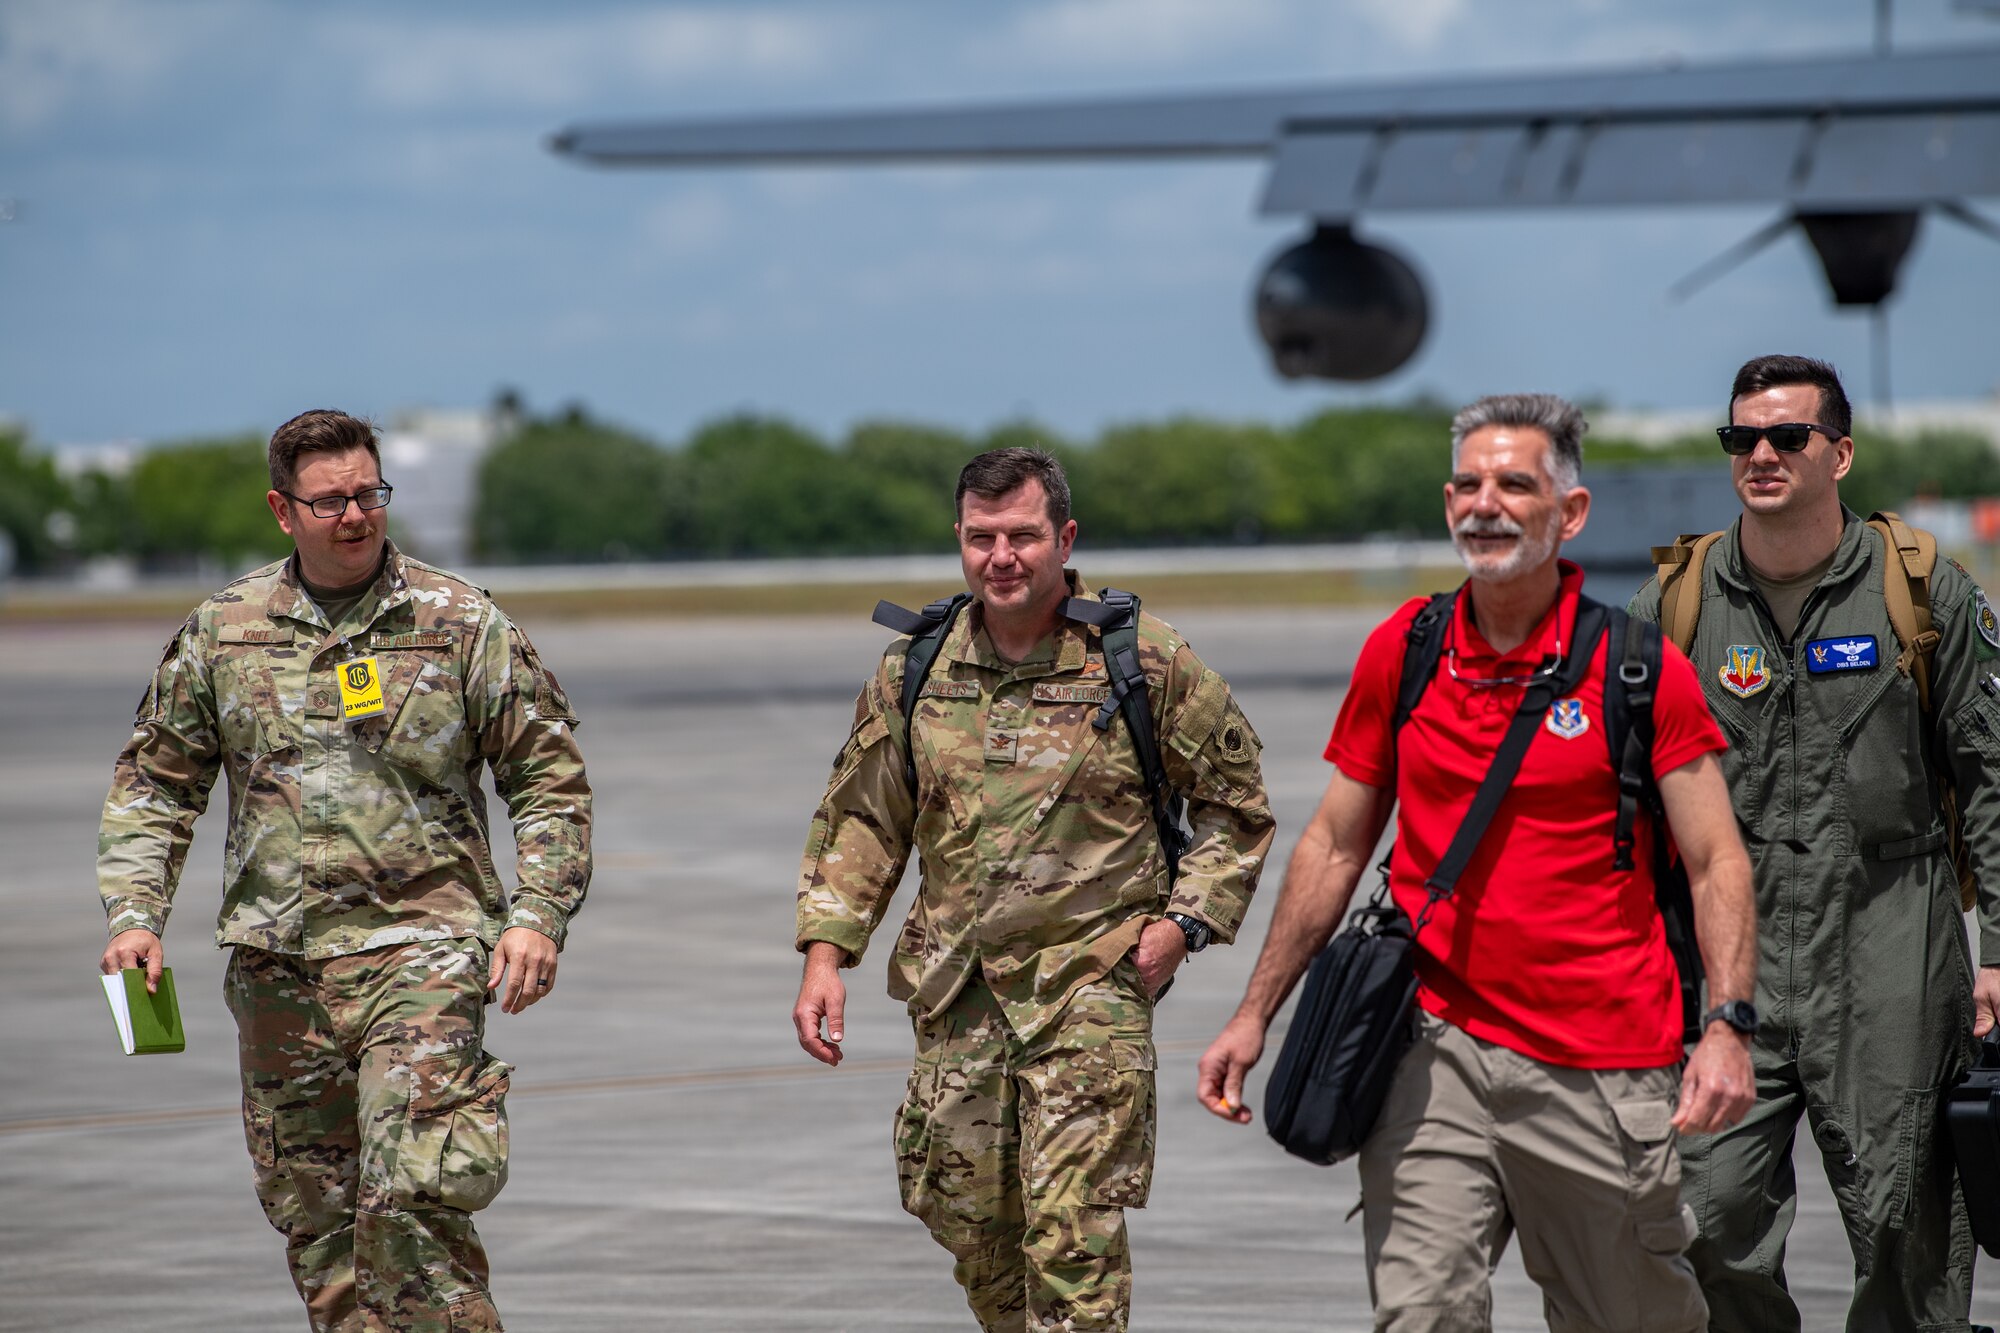 U.S. Air Force Col. Paul Sheets, 23rd Wing commander (second from left), arrives to the main operating base during Exercise Ready Tiger 24-1 at Savannah Air National Guard Base, Georgia, April 10, 2024. During Ready Tiger 24-1, exercise inspectors will assess the 23rd Wing's proficiency in employing decentralized command and control to fulfill air tasking orders across geographically dispersed areas amid communication challenges, integrating Agile Combat Employment principles such as integrated combat turns, forward aerial refueling points, multi-capable Airmen, and combat search and rescue capabilities. (U.S. Air Force photo by Senior Airman Courtney Sebastianelli)